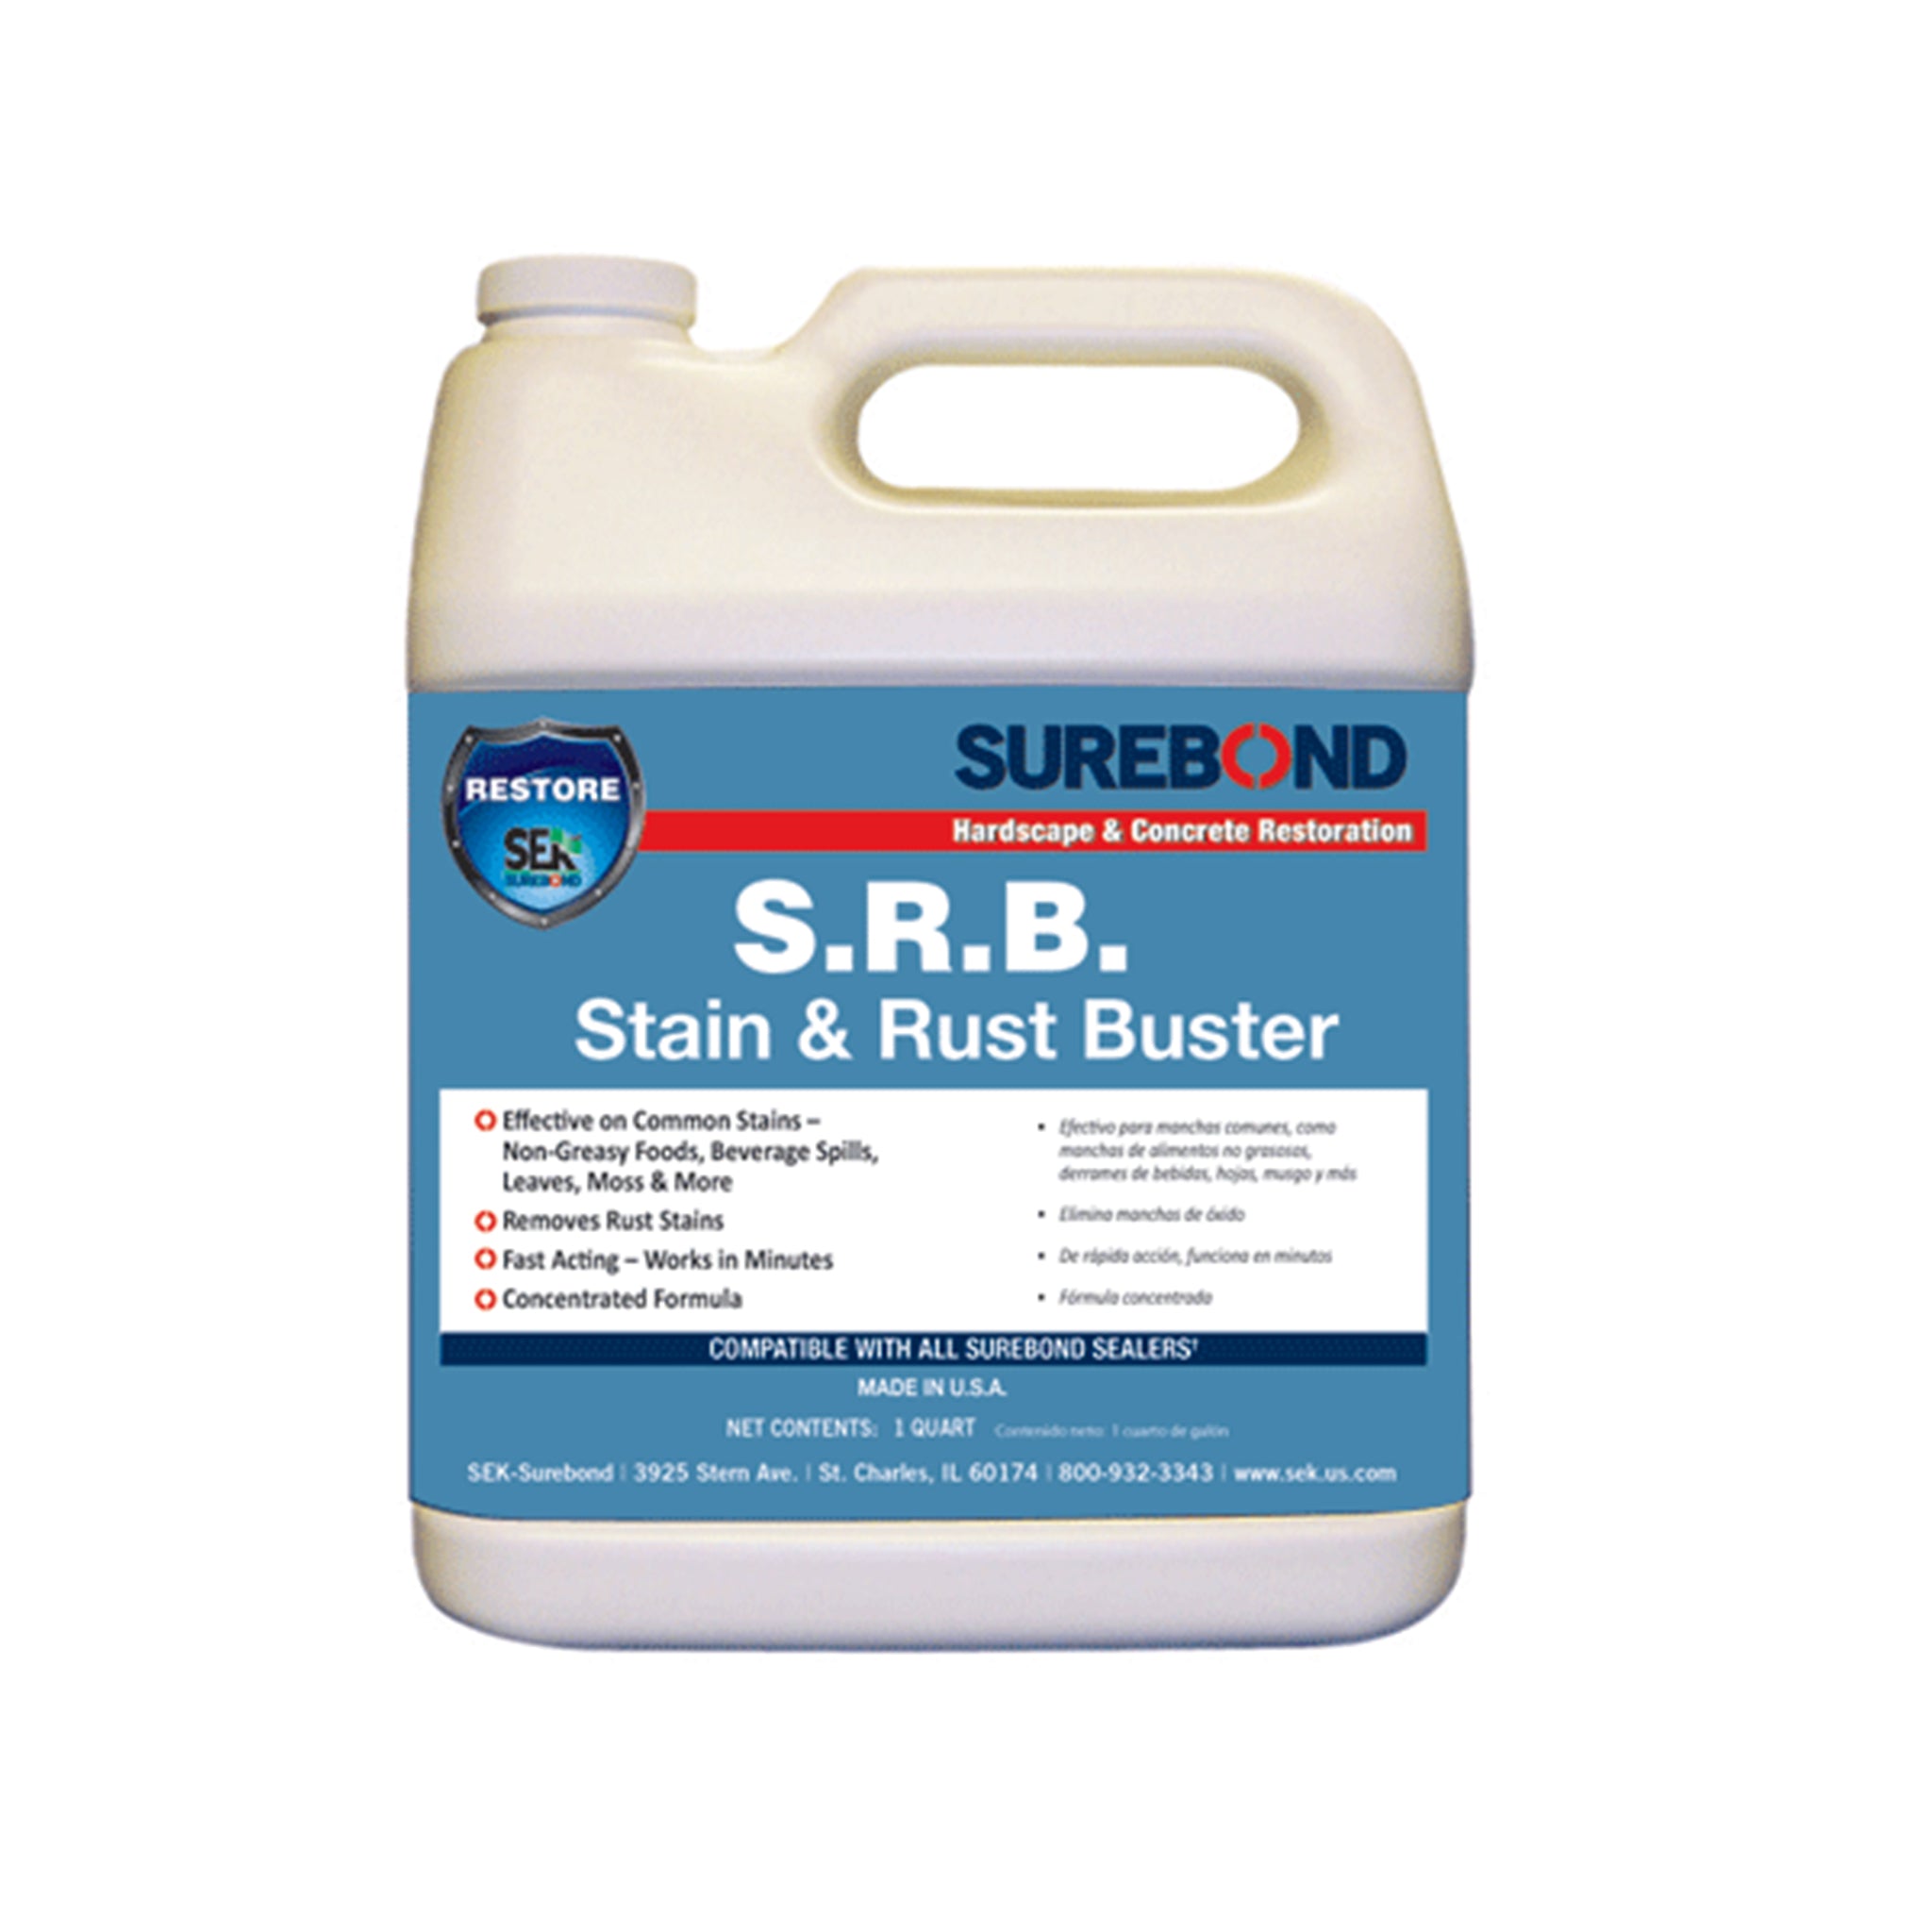 Surebond S.R.B Stain and Rust Buster Patio Care